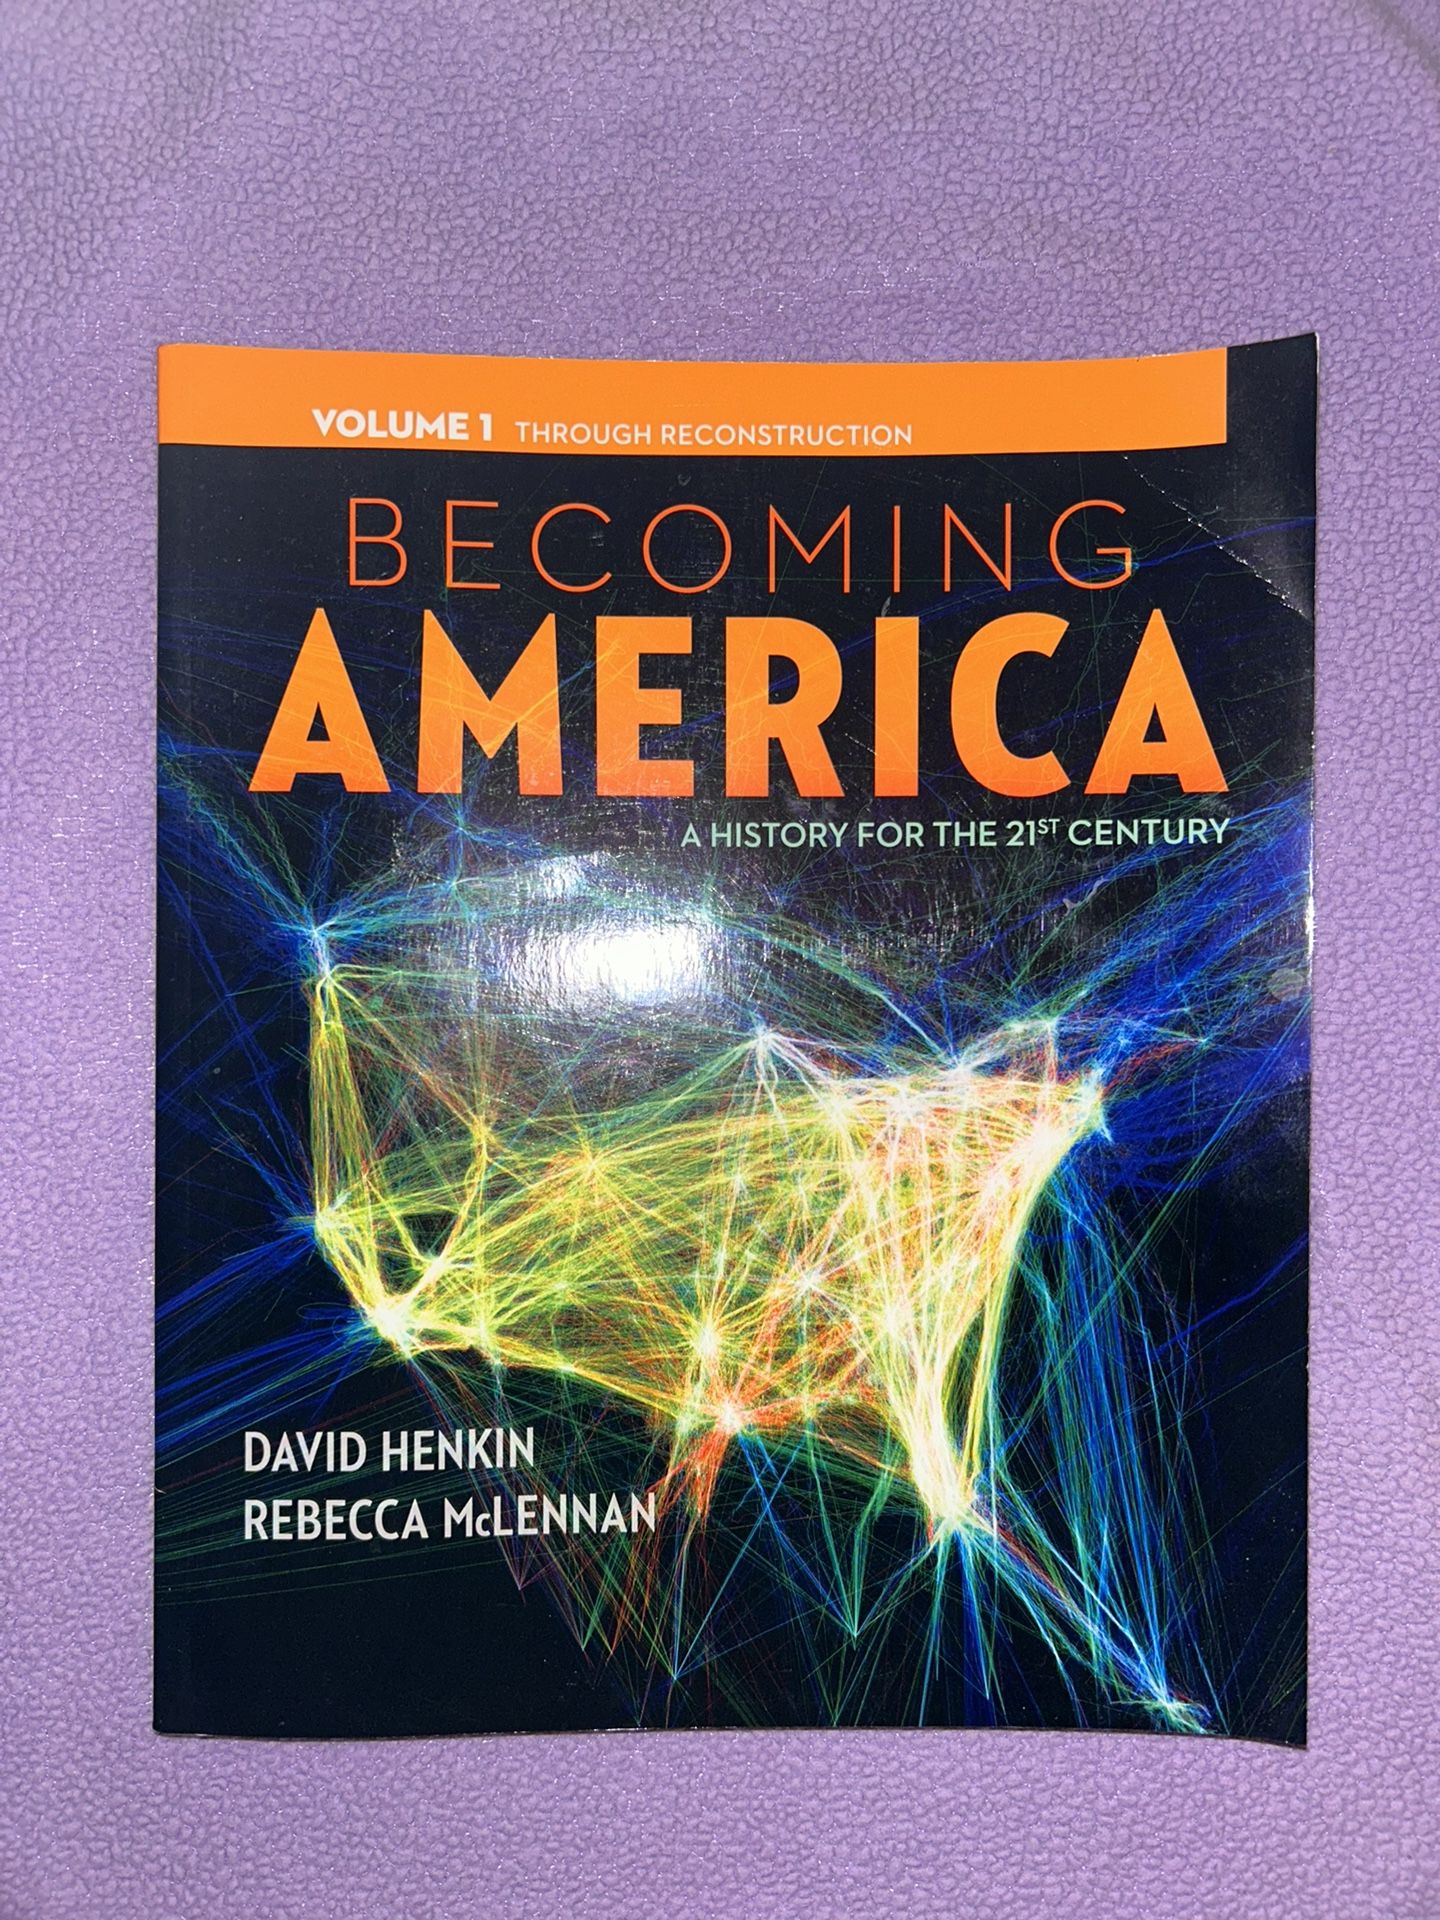 Becoming America: Volume I, 1st Edition, Orange and Black, 8.9 x 10.8 inches